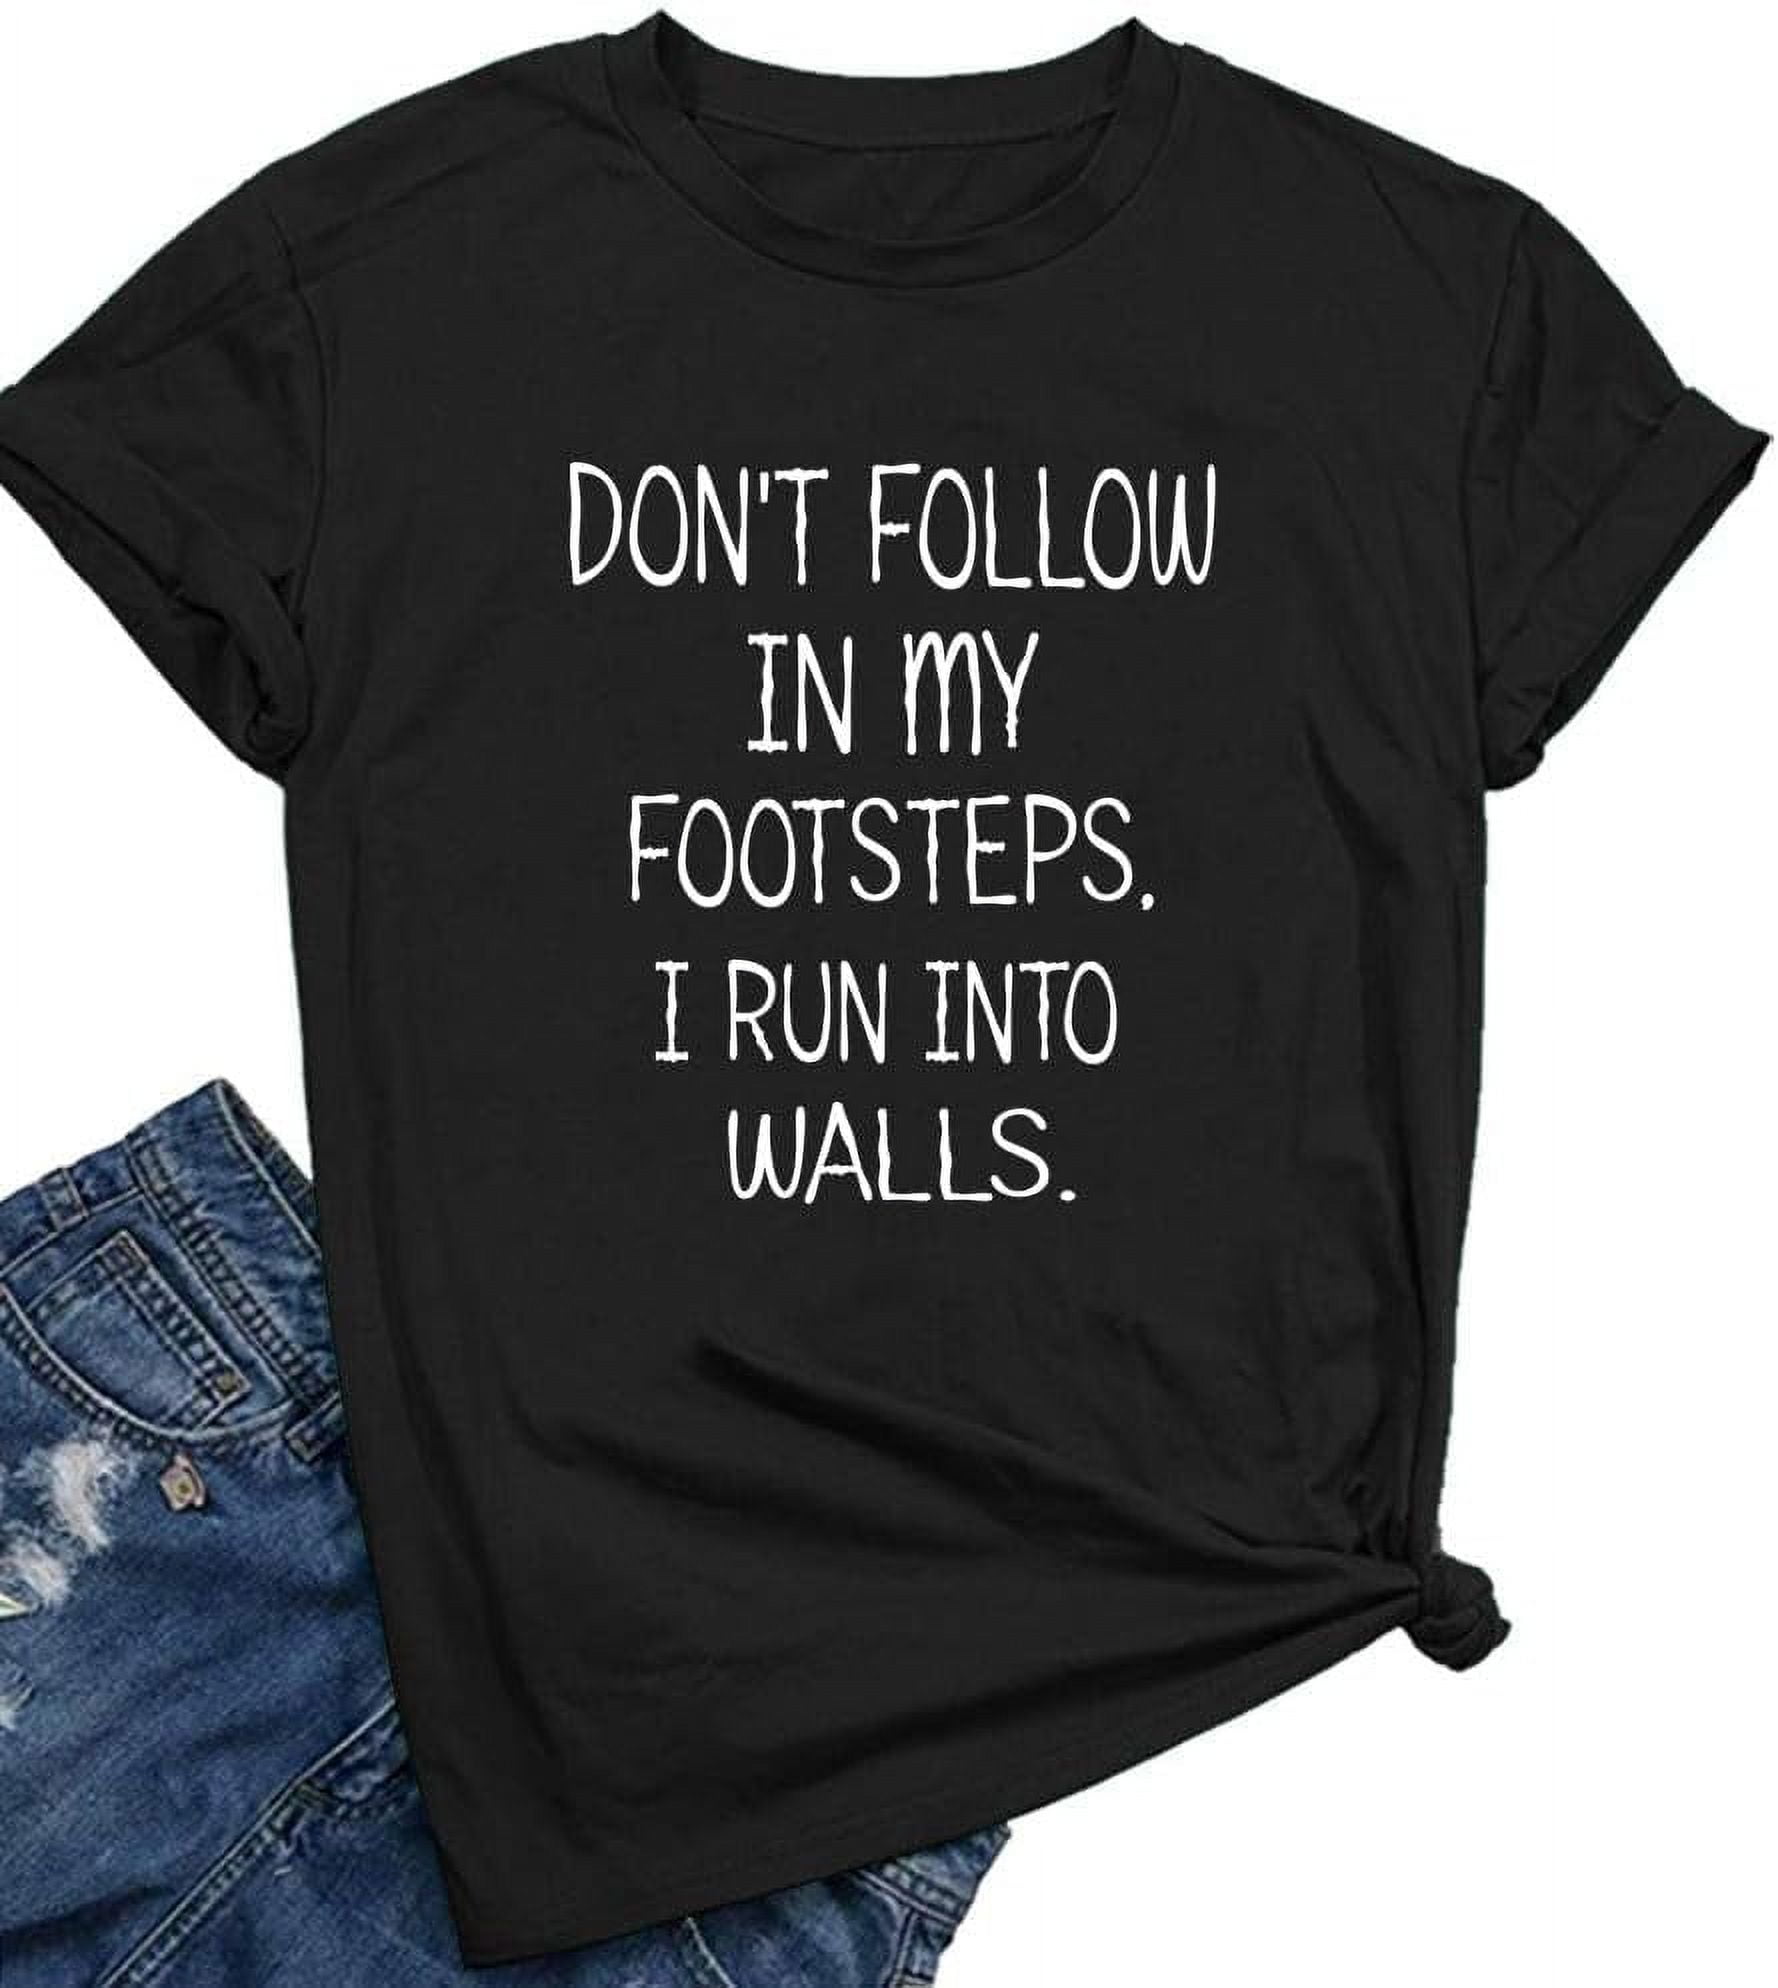 BLACKOO Women Don't Follow in My Footsteps Cute T Shirts Graphic ...